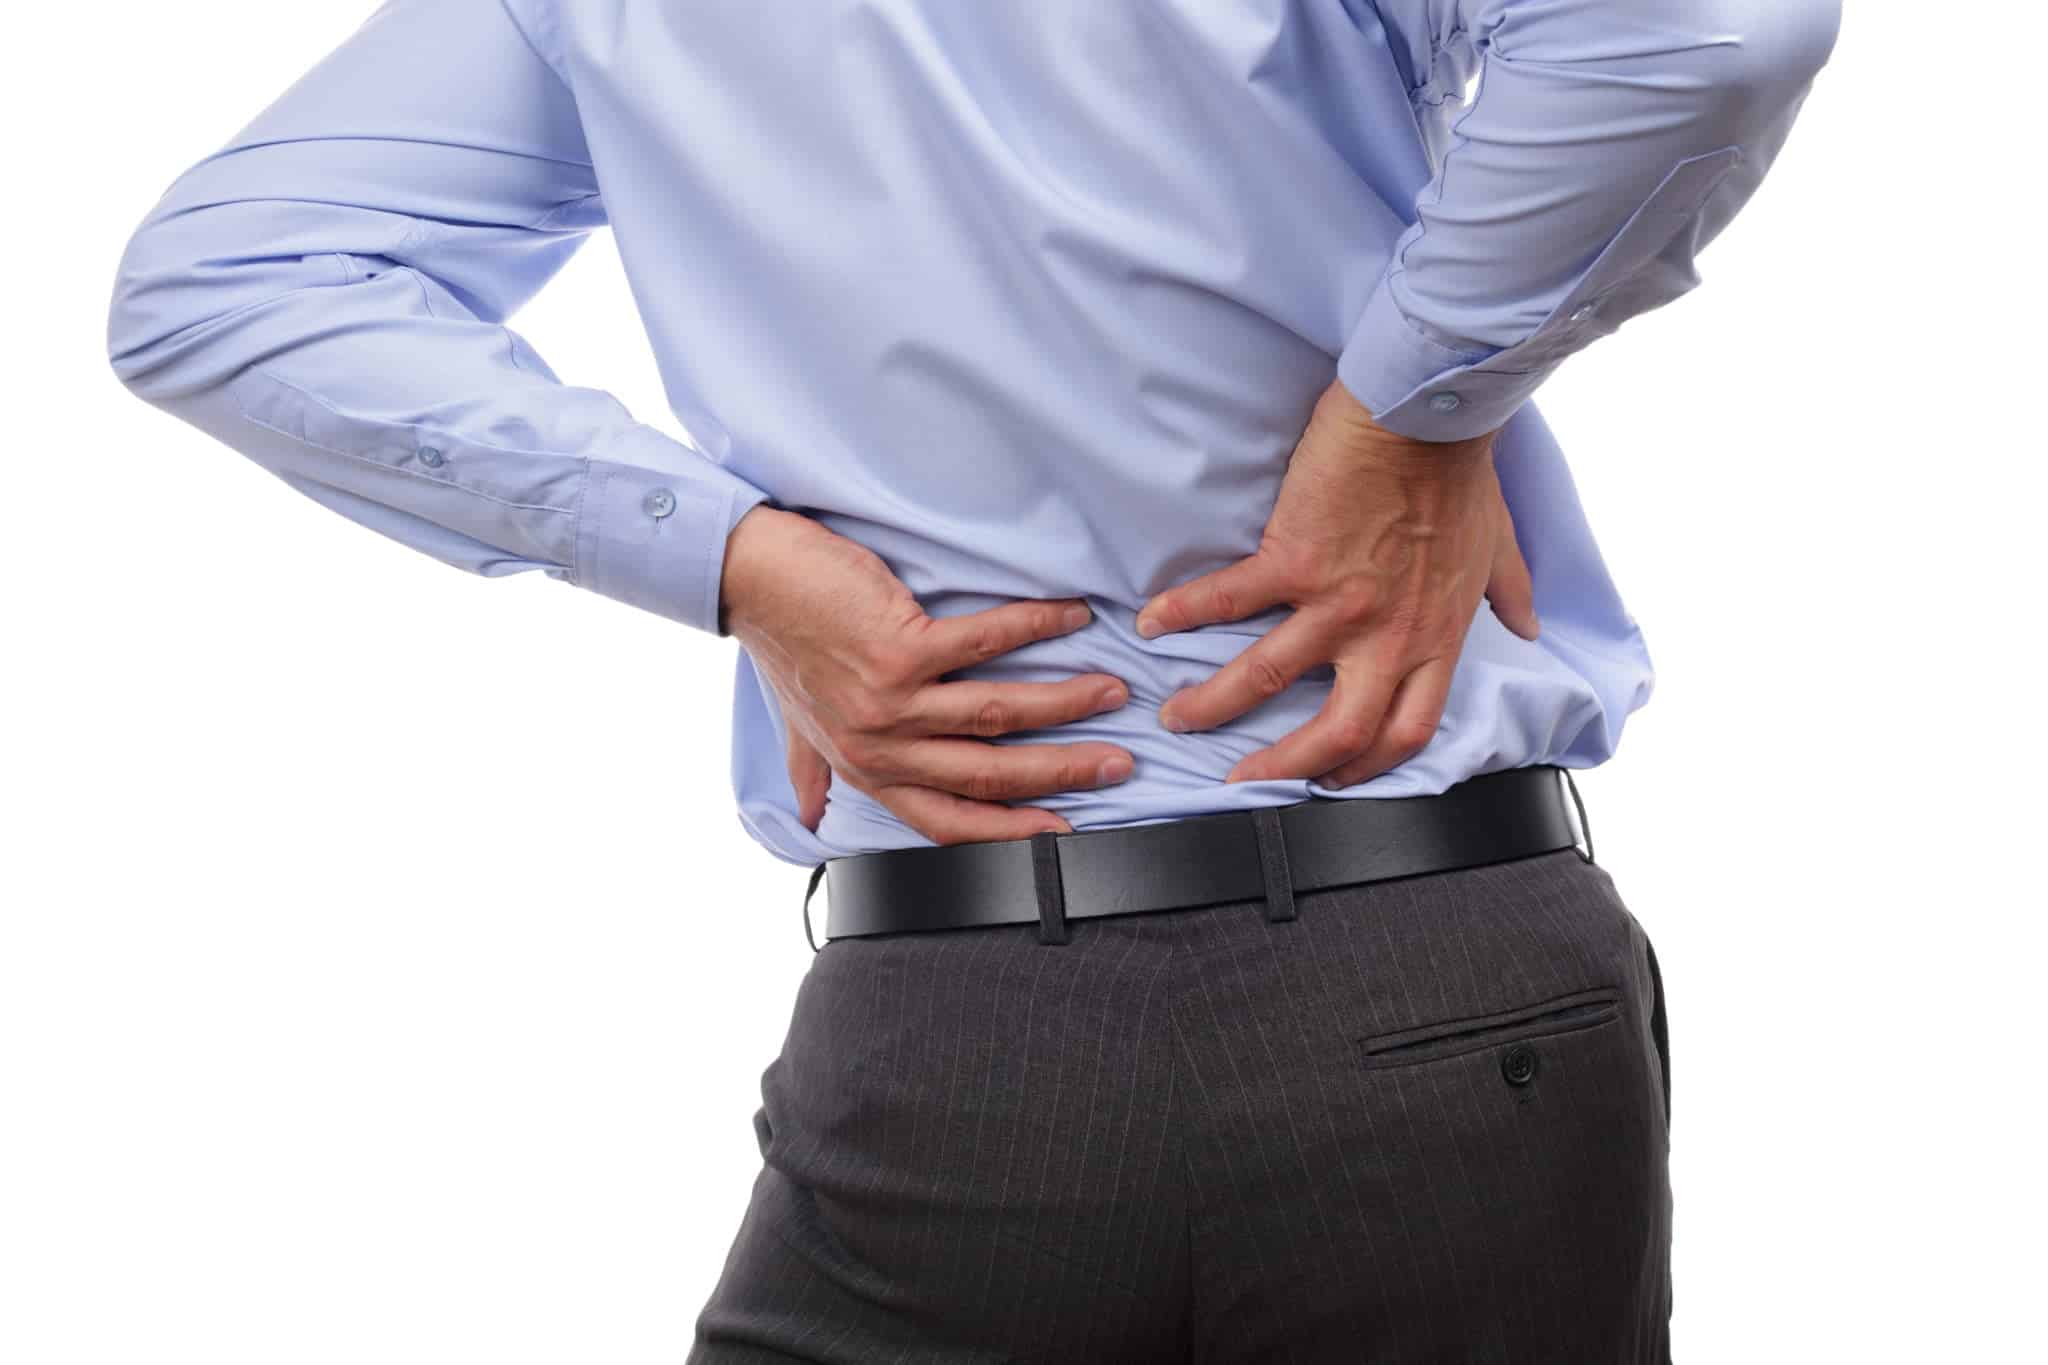 Low Back Pain, it’s more common than you think!